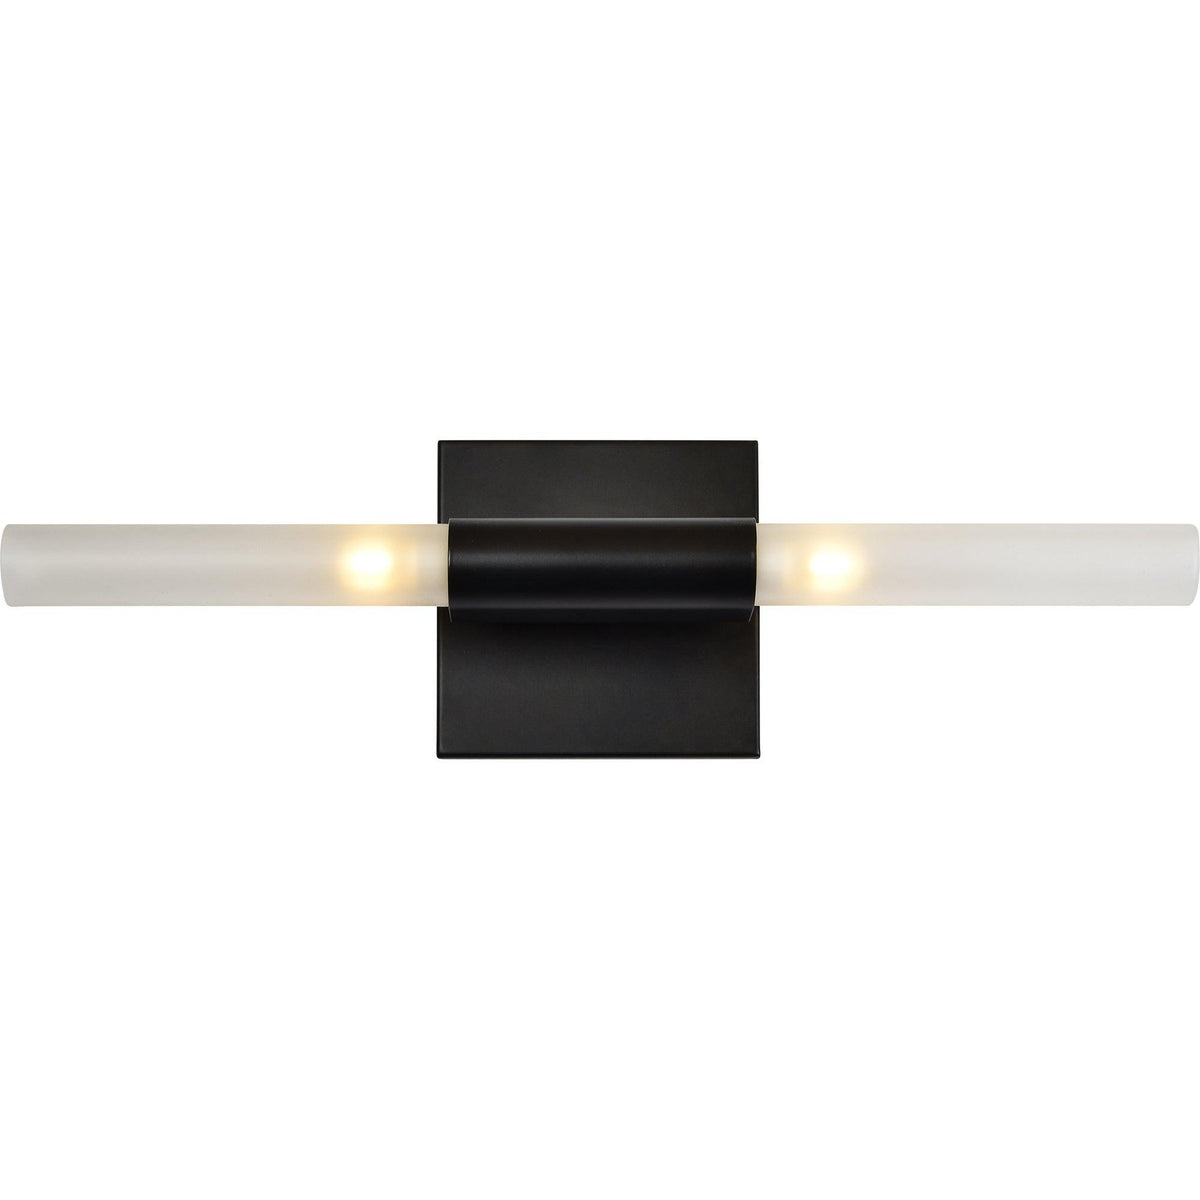 Renwil - Lina Wall Sconce - WS118 | Montreal Lighting & Hardware